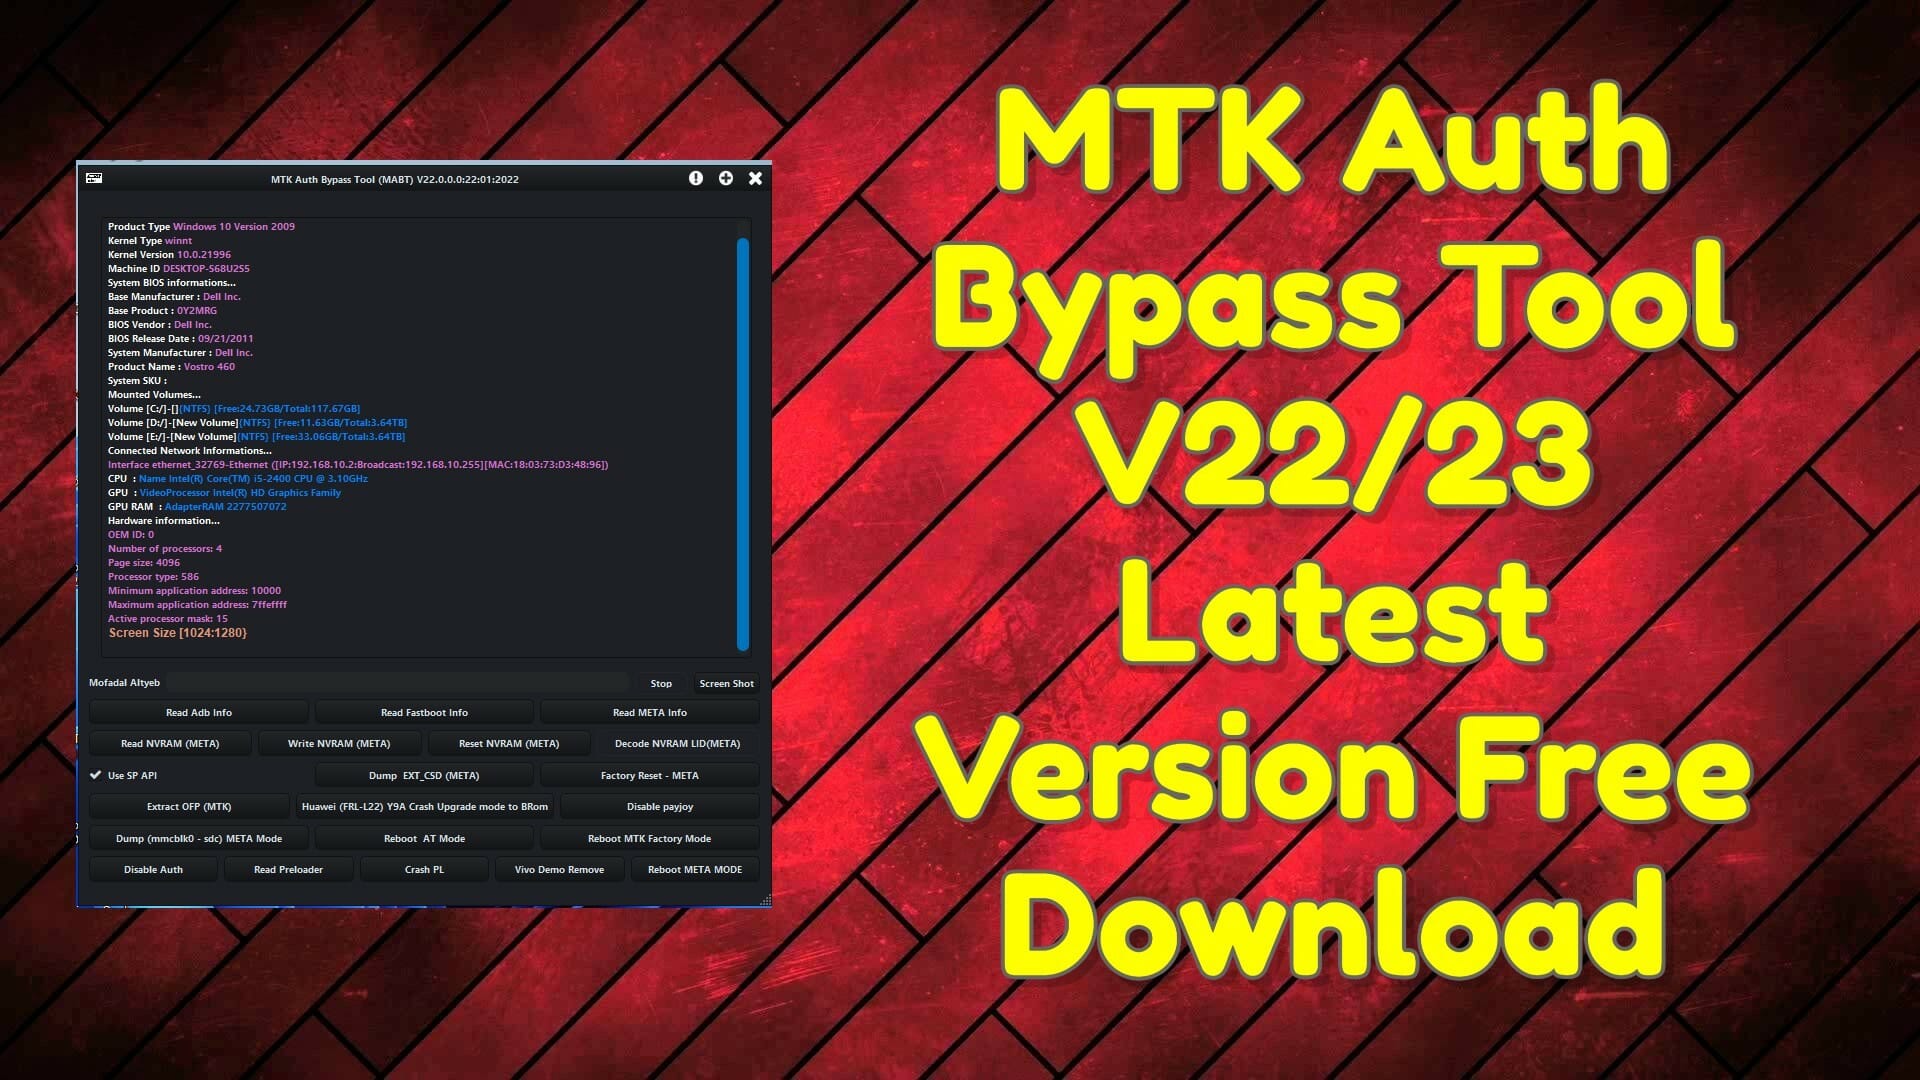 MTK Auth Bypass Tool V22/23 Latest Version Free Download